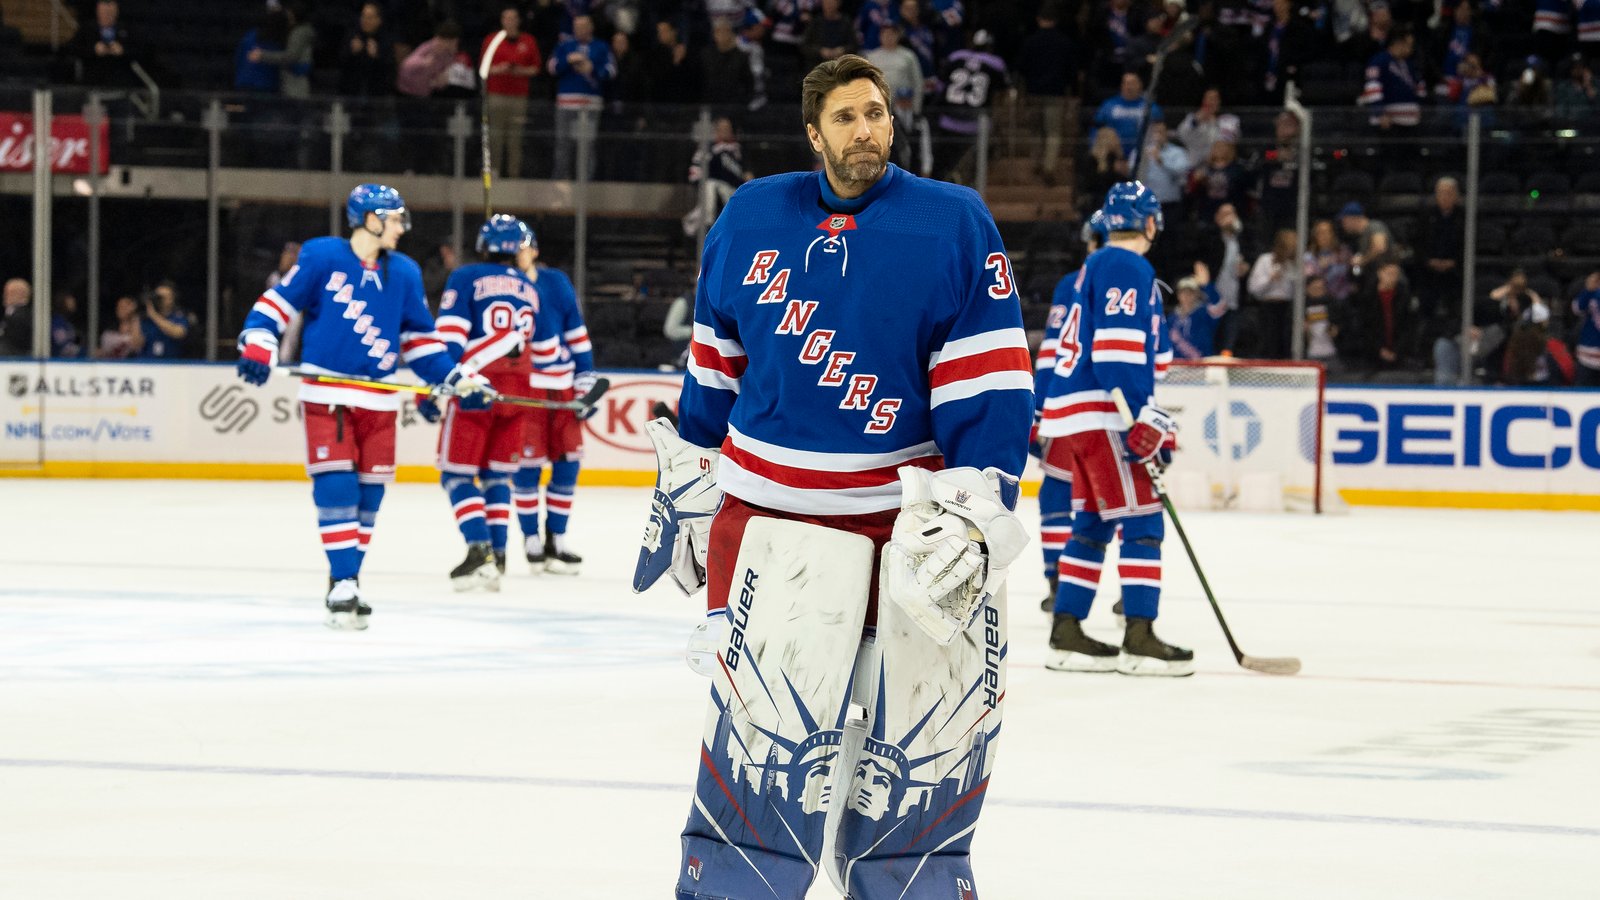 Report: Lundqvist will remain the odd man out after the trade deadline